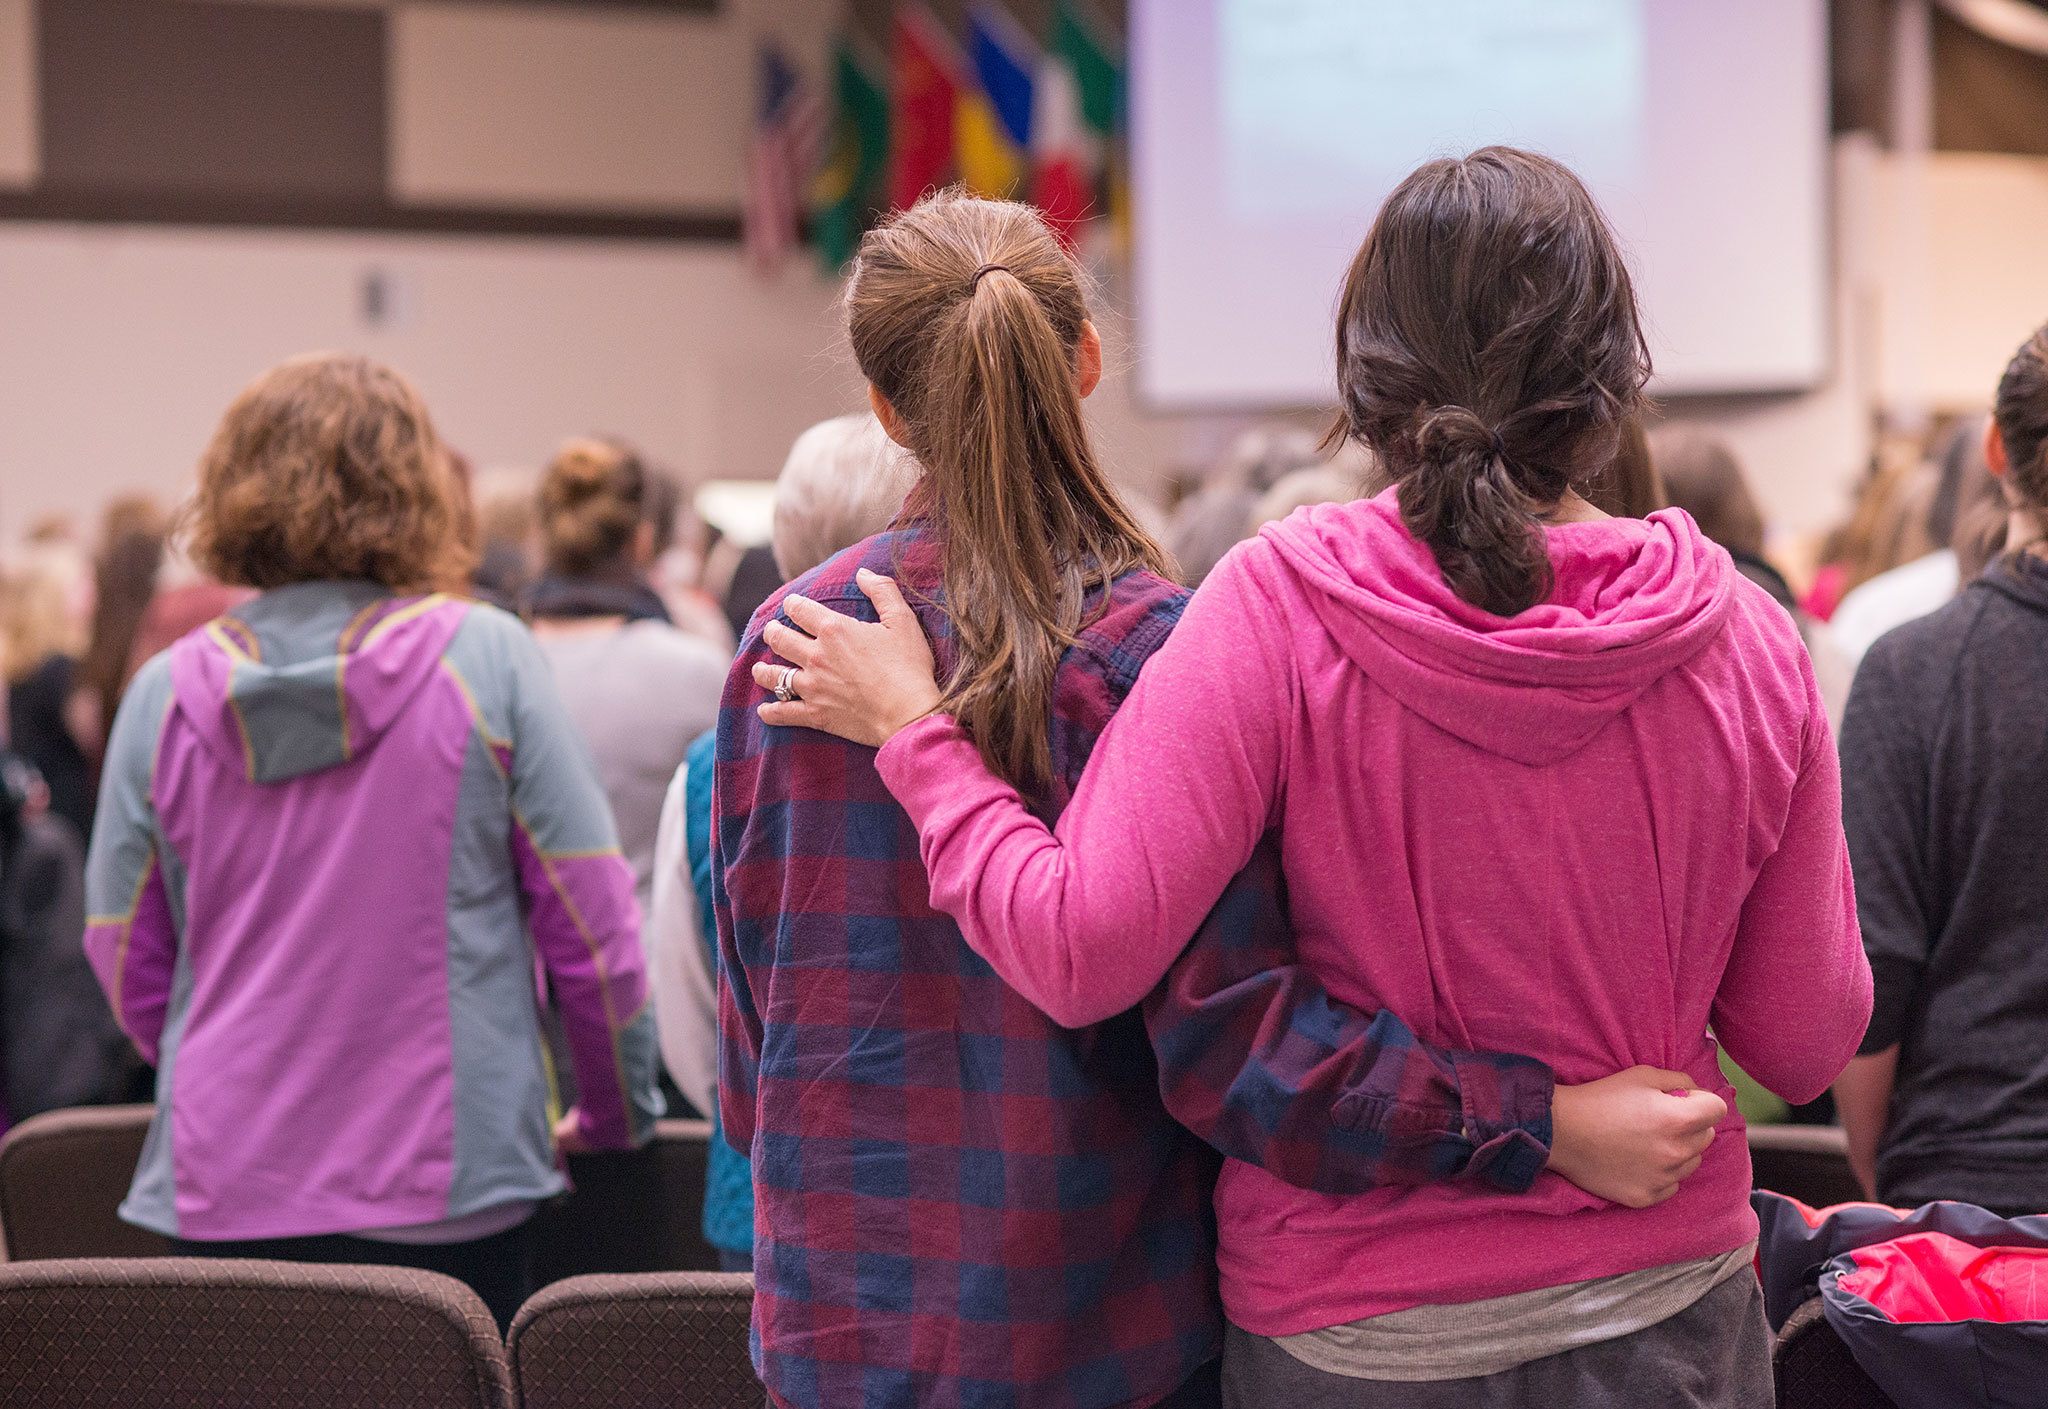 A mother and daughter participate in worship music together at the Olympic Peninsula Women’s Fellowship’s first conference on Feb. 24-25 in Dungeness Community Church. Photo by Erin Henderson